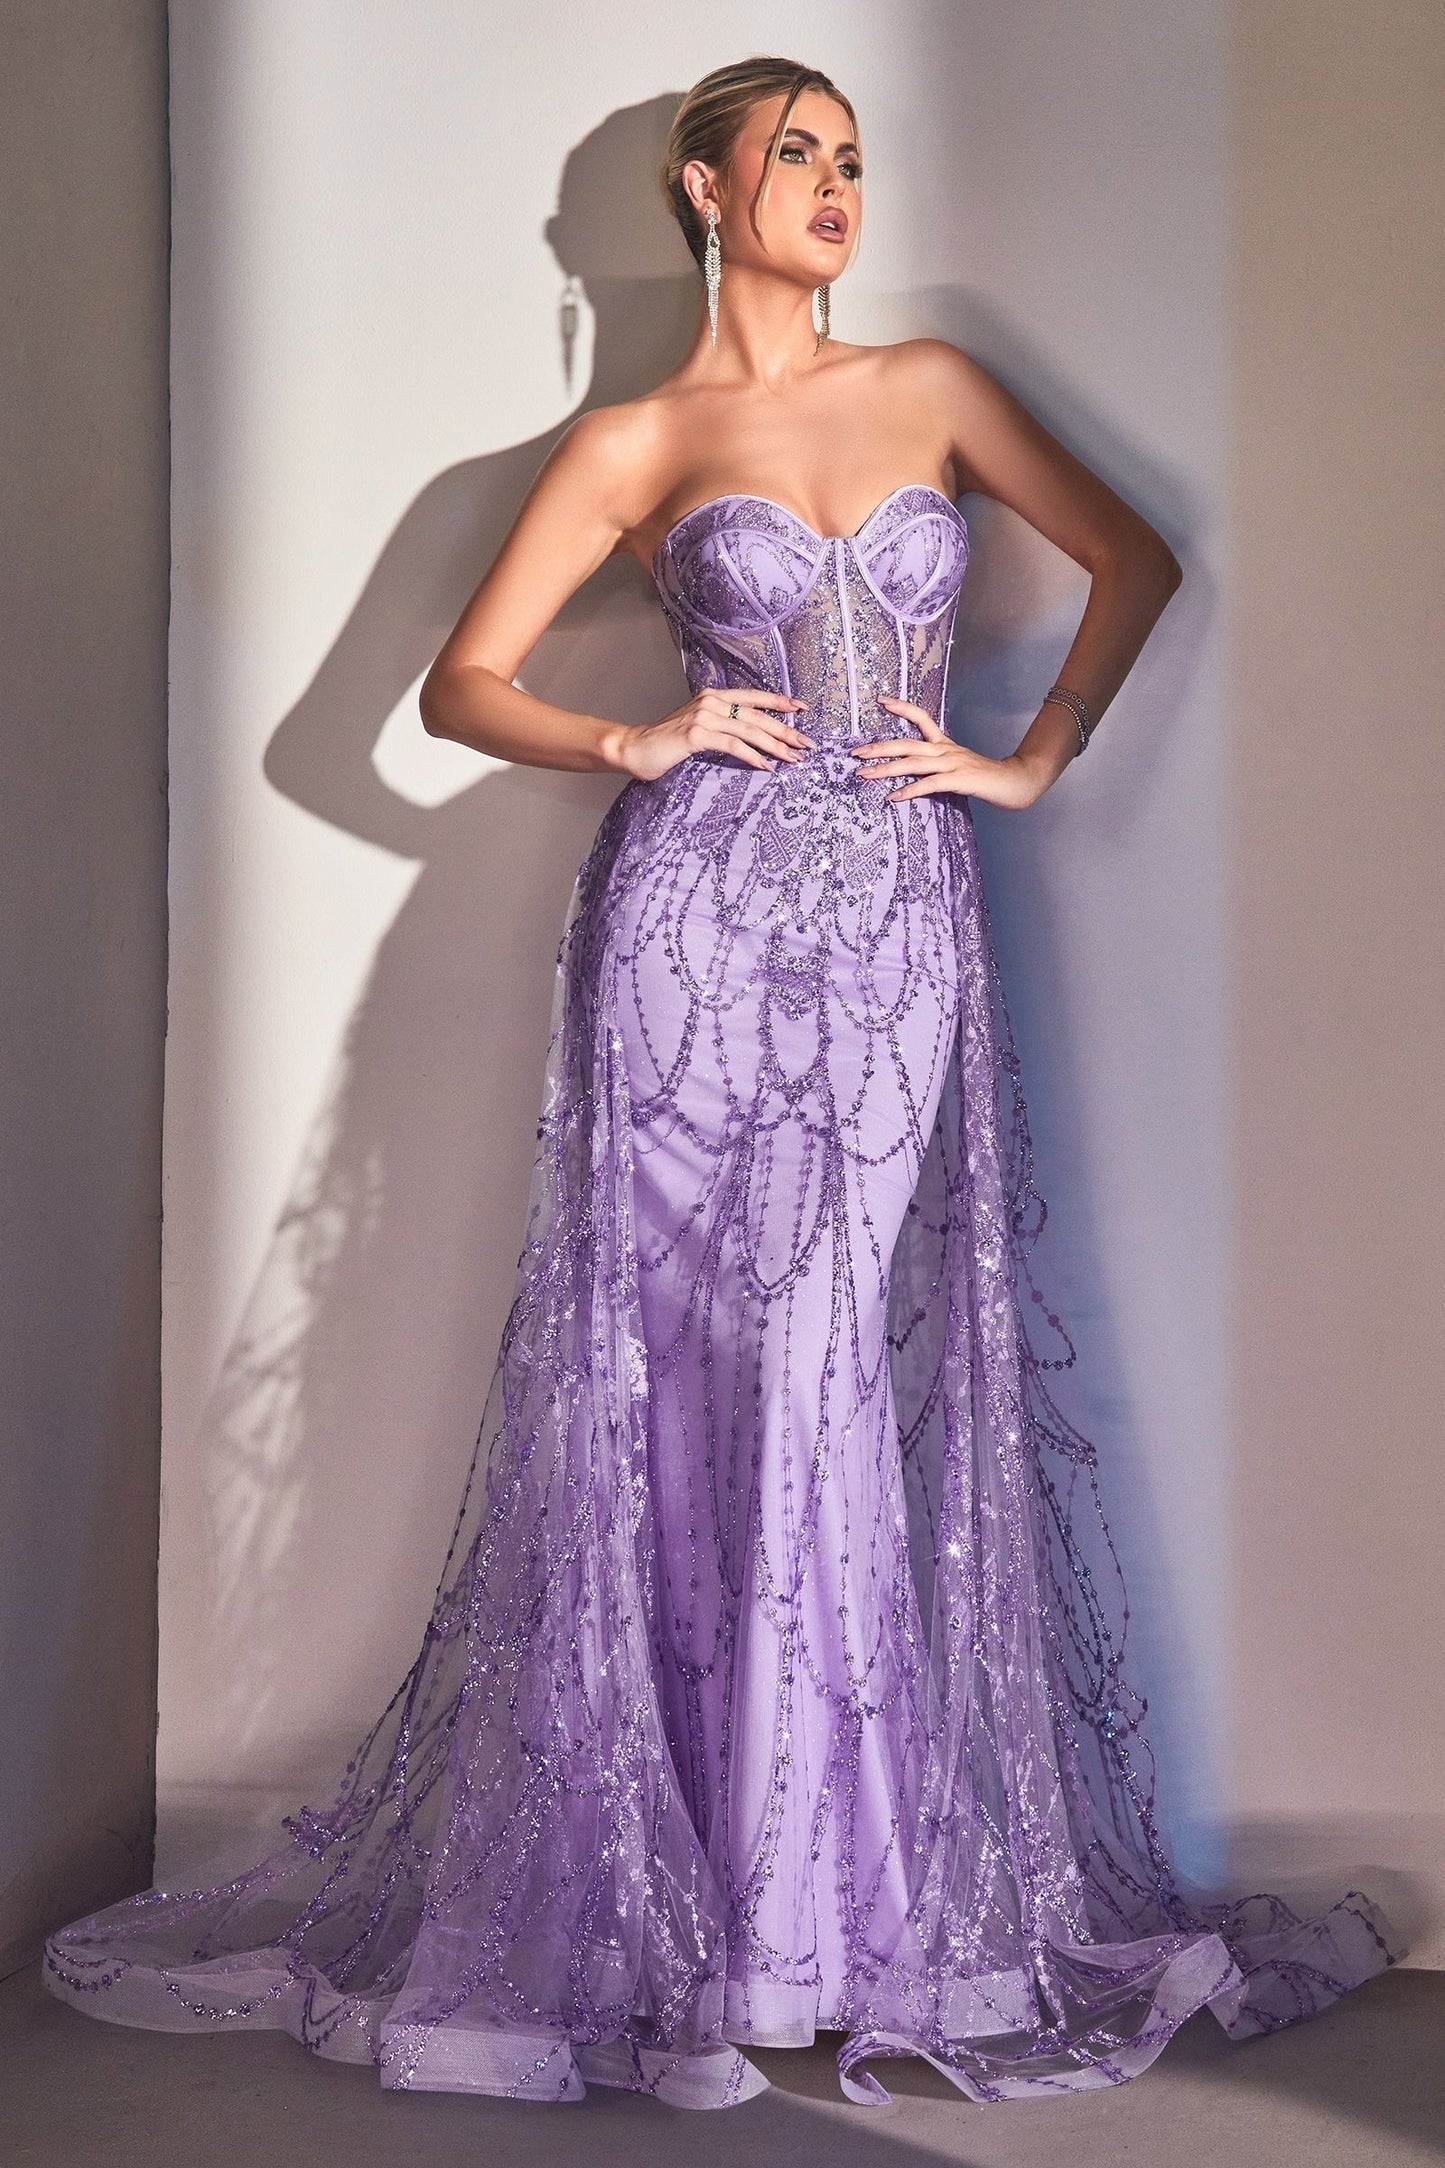 Romantic and feminine strapless mermaid gown with a sheer overskirt in lavender color